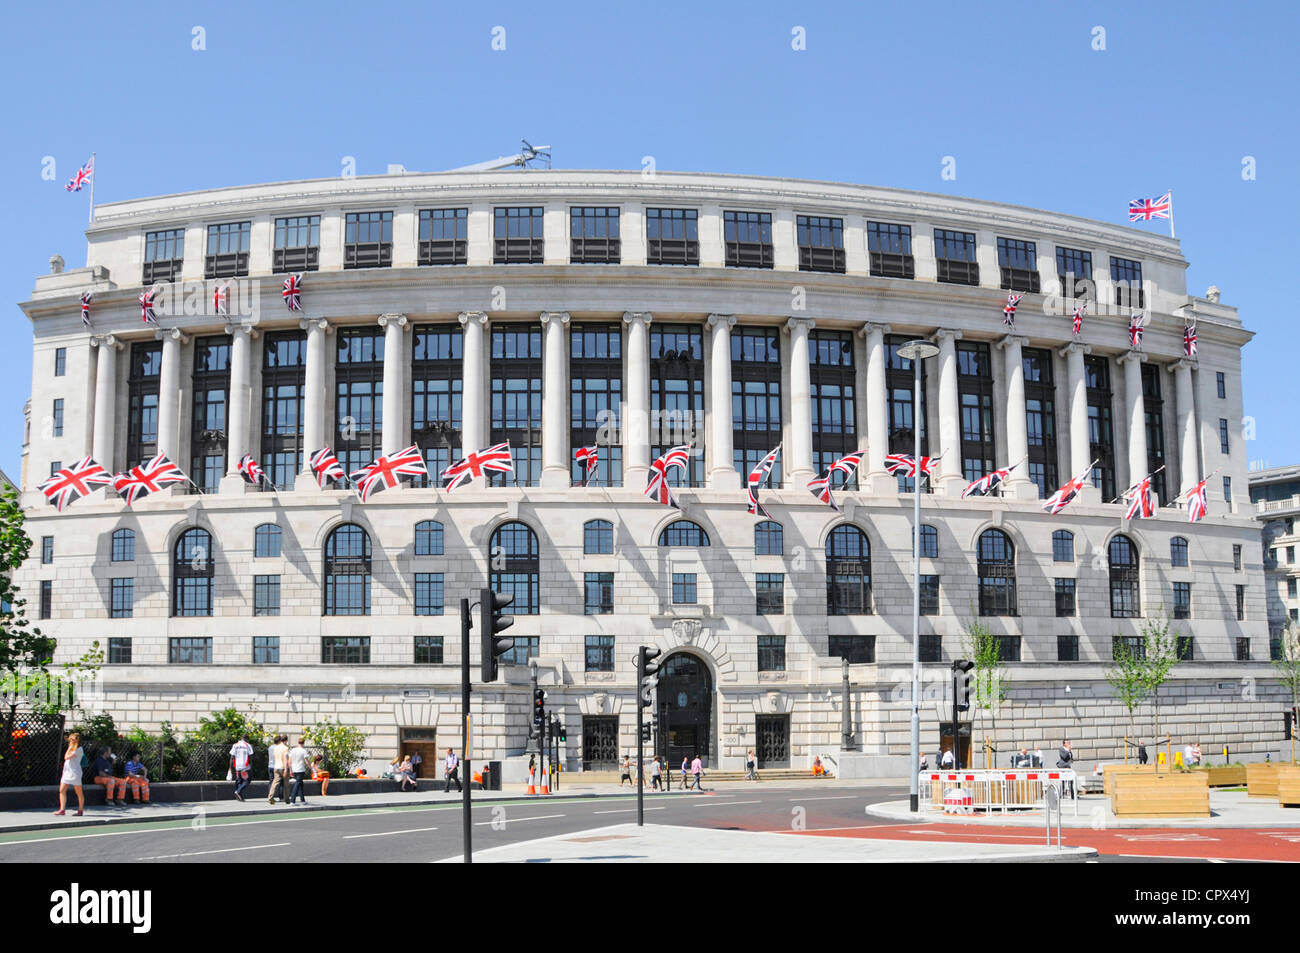 Unilever House headquarters curved Neoclassical Art Deco office building frontage facade with union jack flags Blackfriars City of London England UK Stock Photo